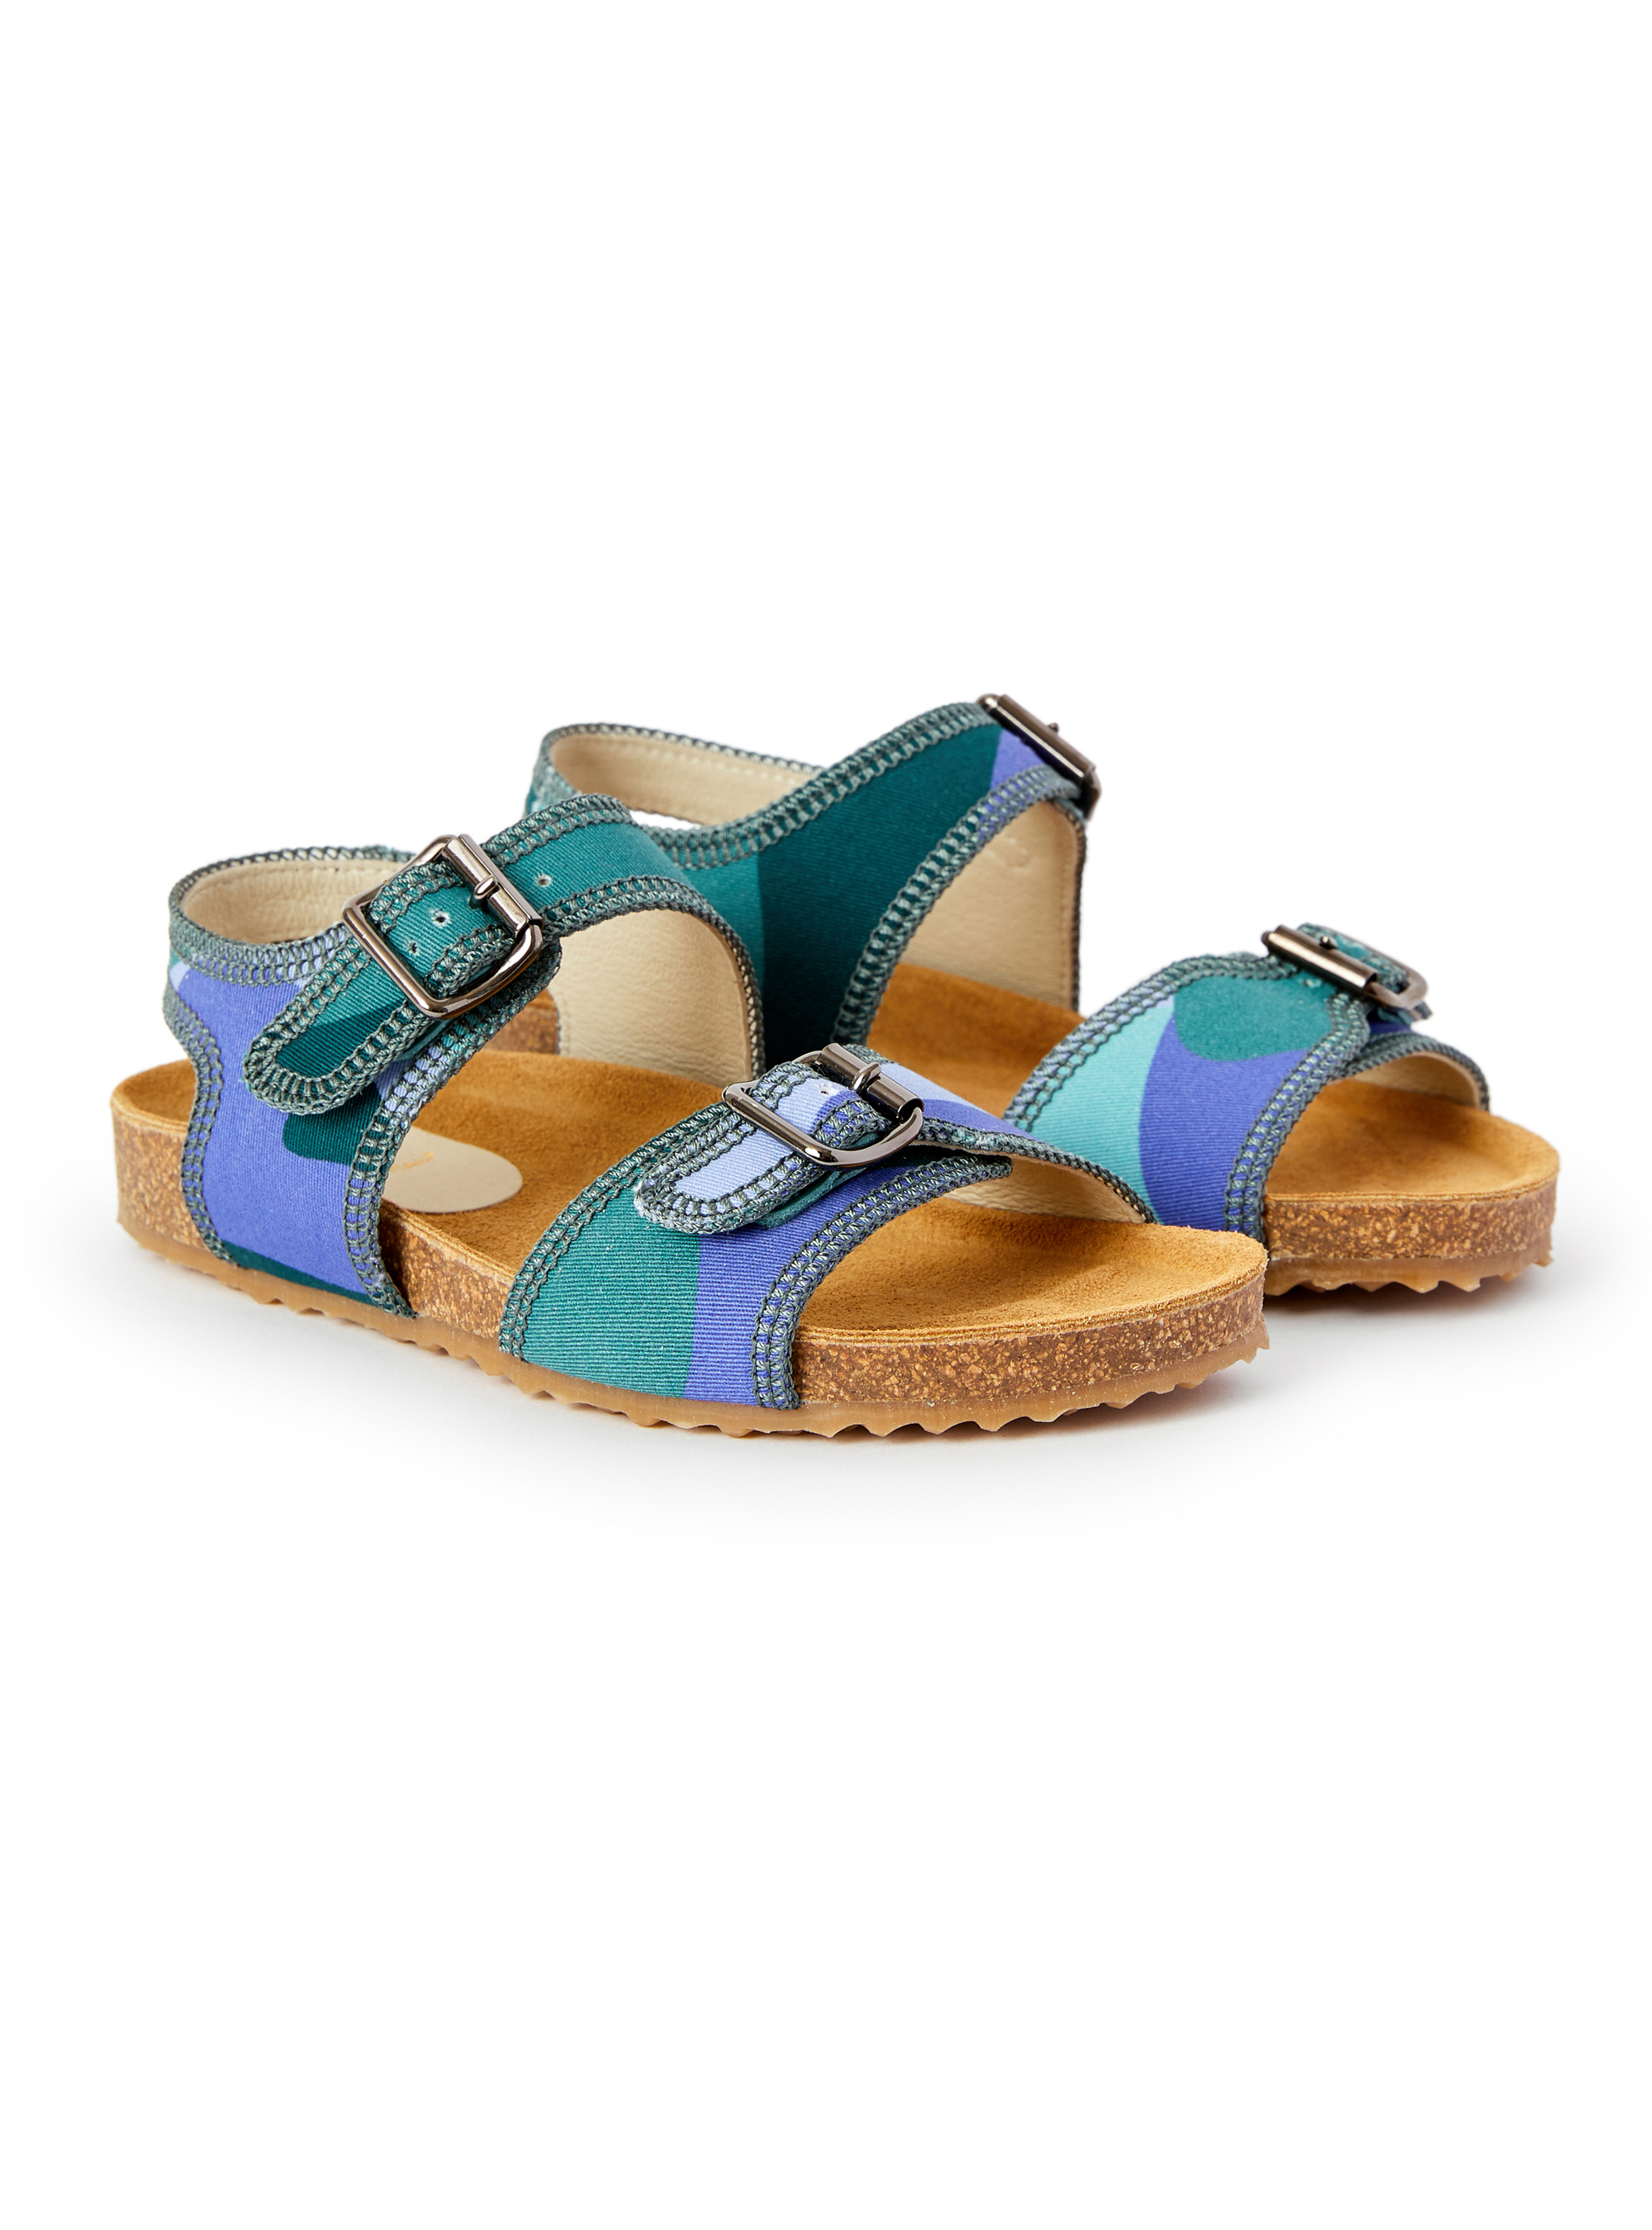 Camouflage sandal with buckles - Shoes - Il Gufo